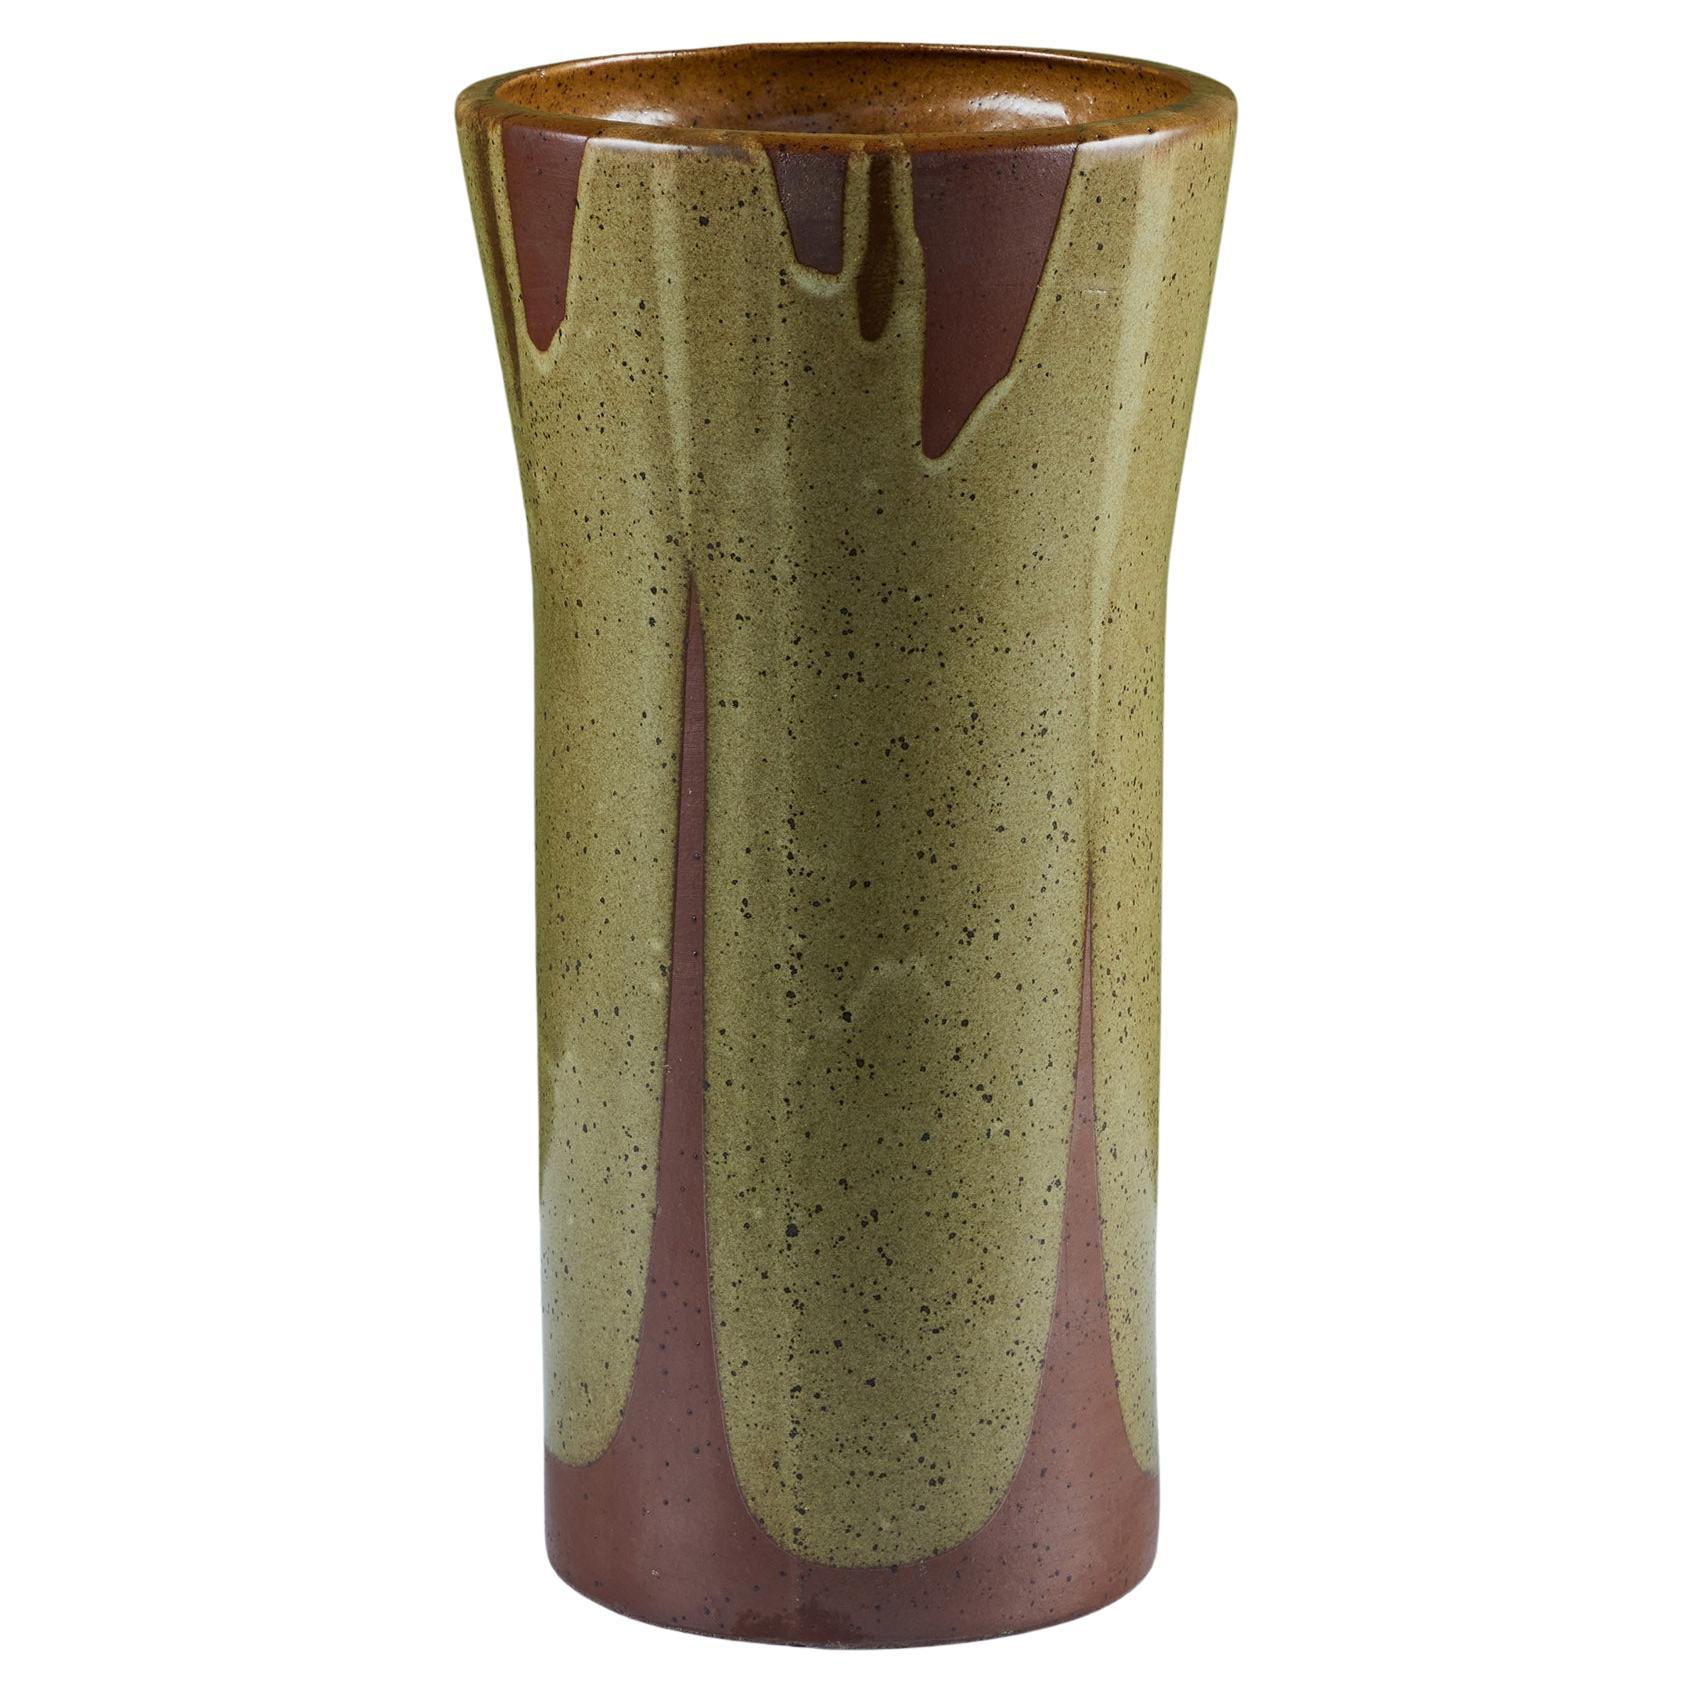 David Cressey Pro/Artisan Flame-Glaze Urn for Architectural Pottery